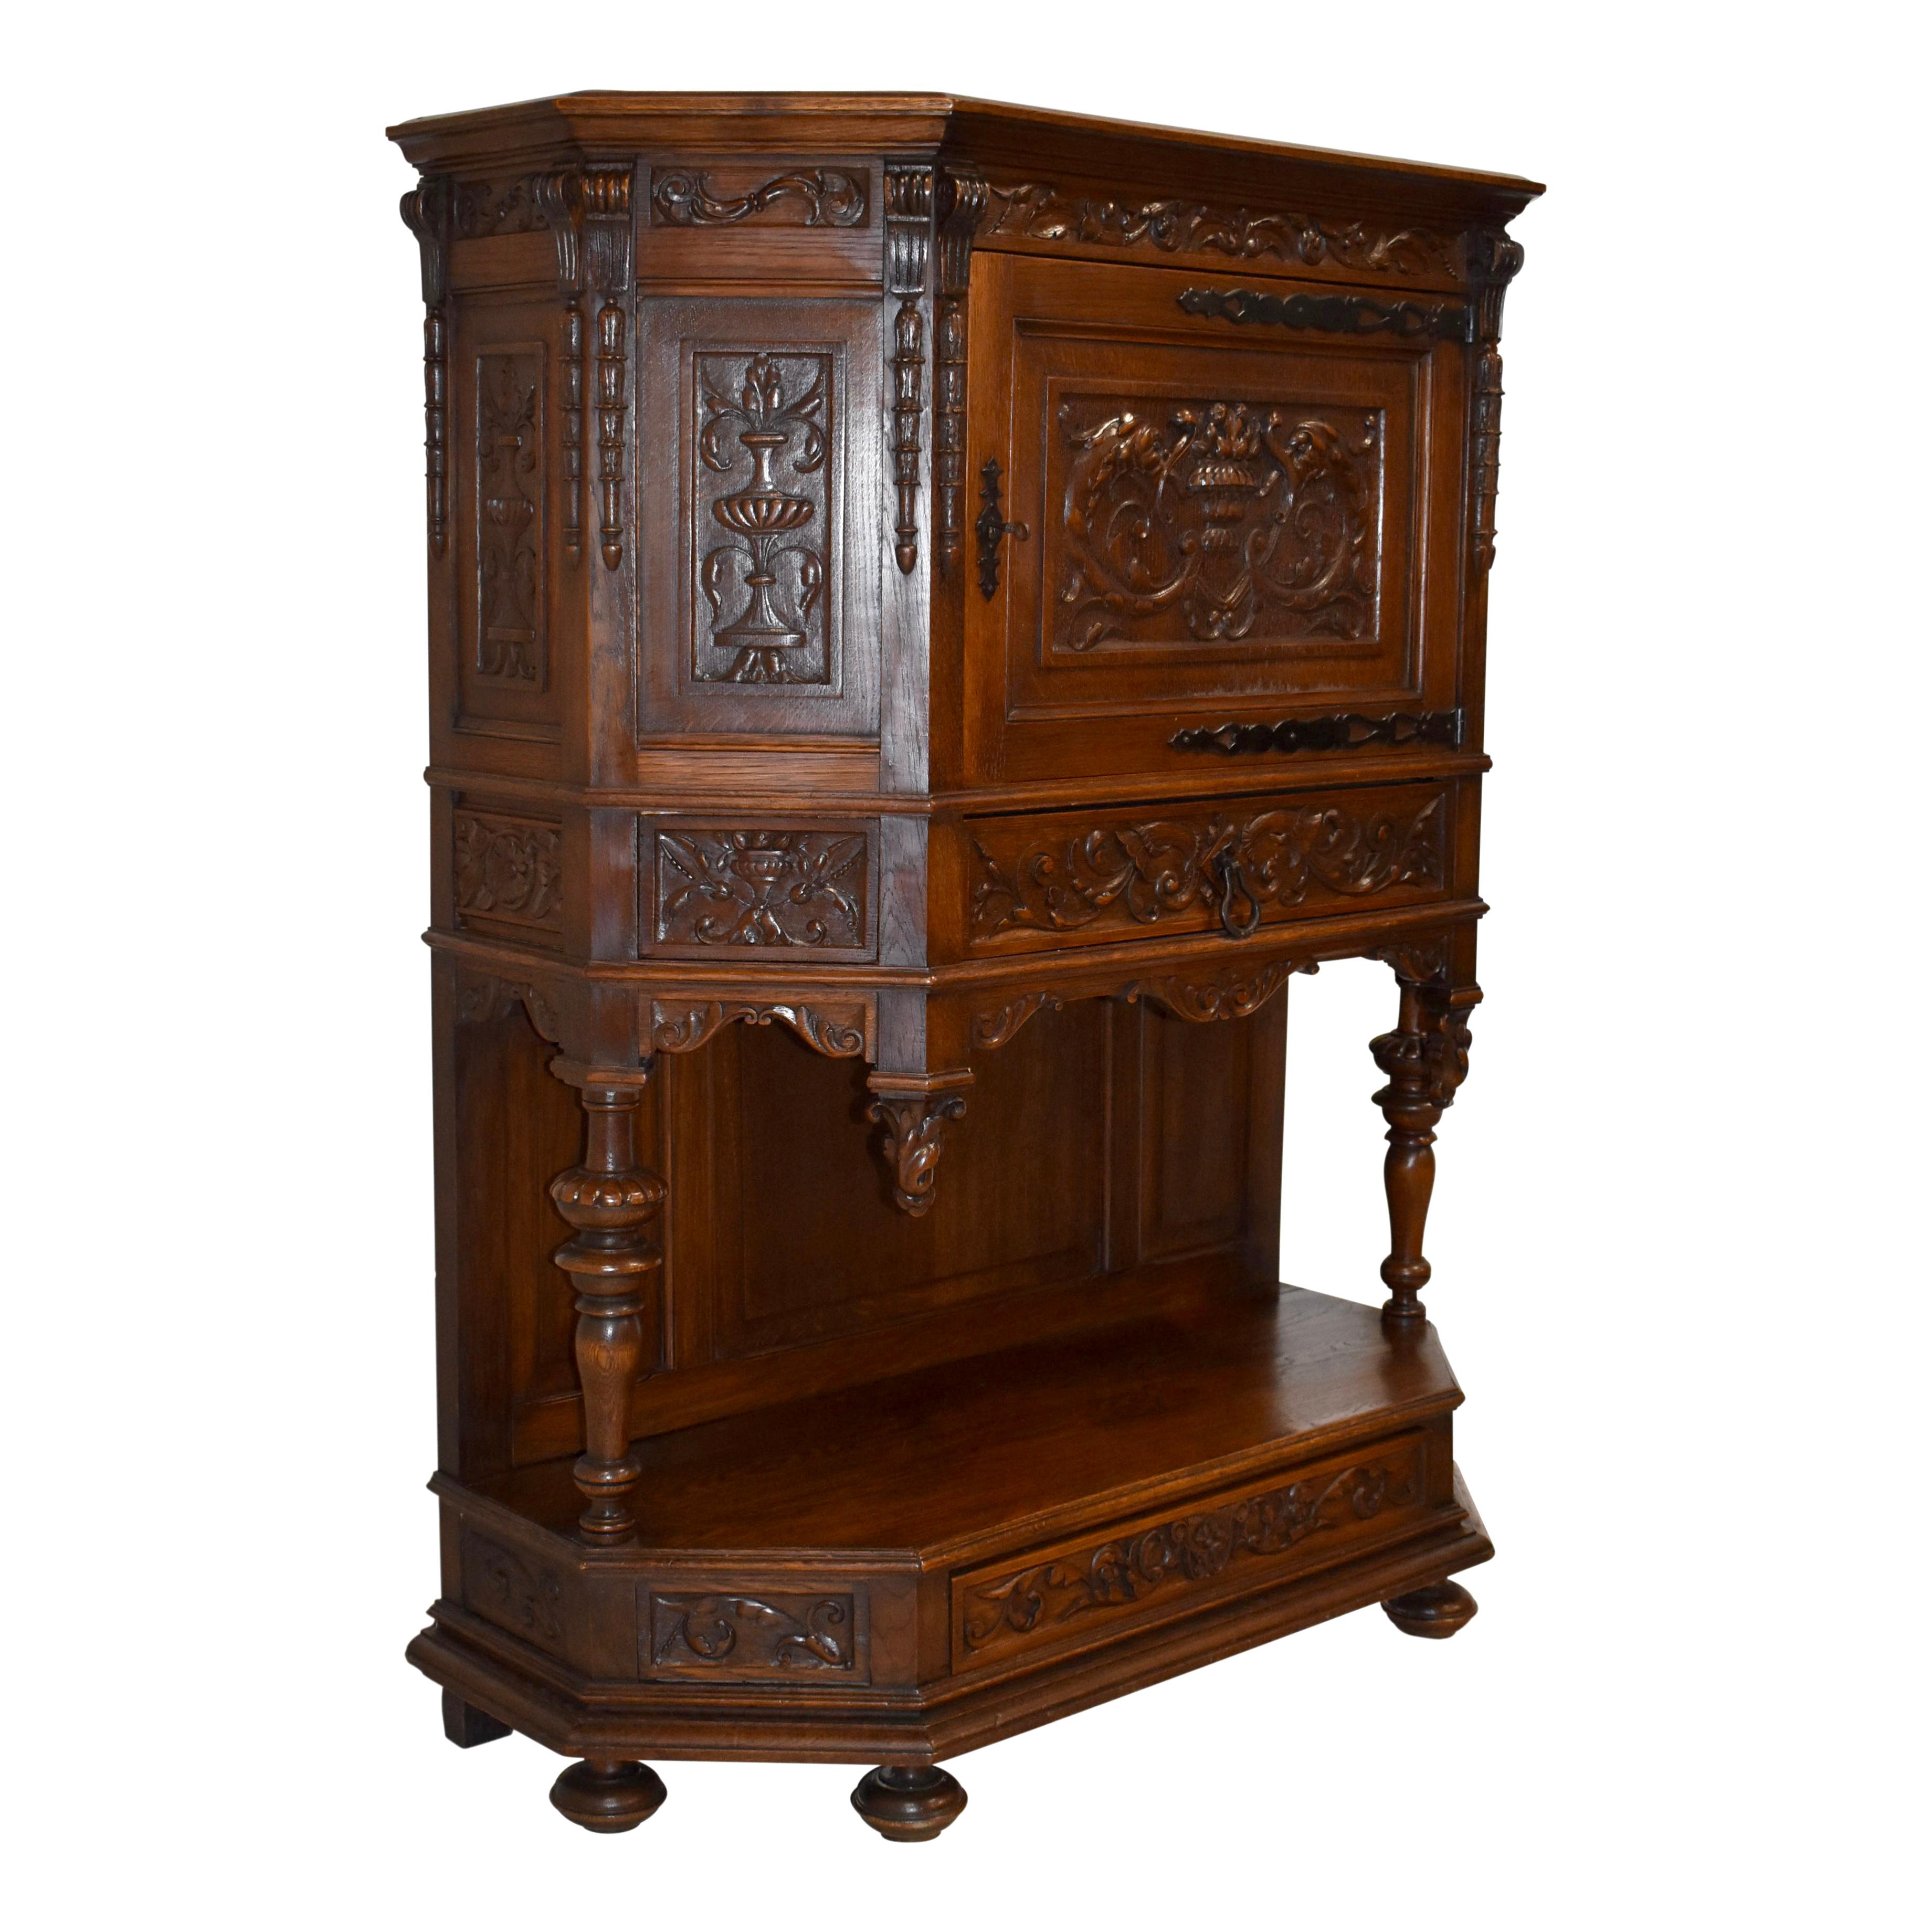 This heavily carved oak cabinet features a top with canted sides and a single door that showcases an urn flanked by opposing fish. The door swings on elegant, long hinges and opens to a single shelf. Below the door, a carved drawer provides